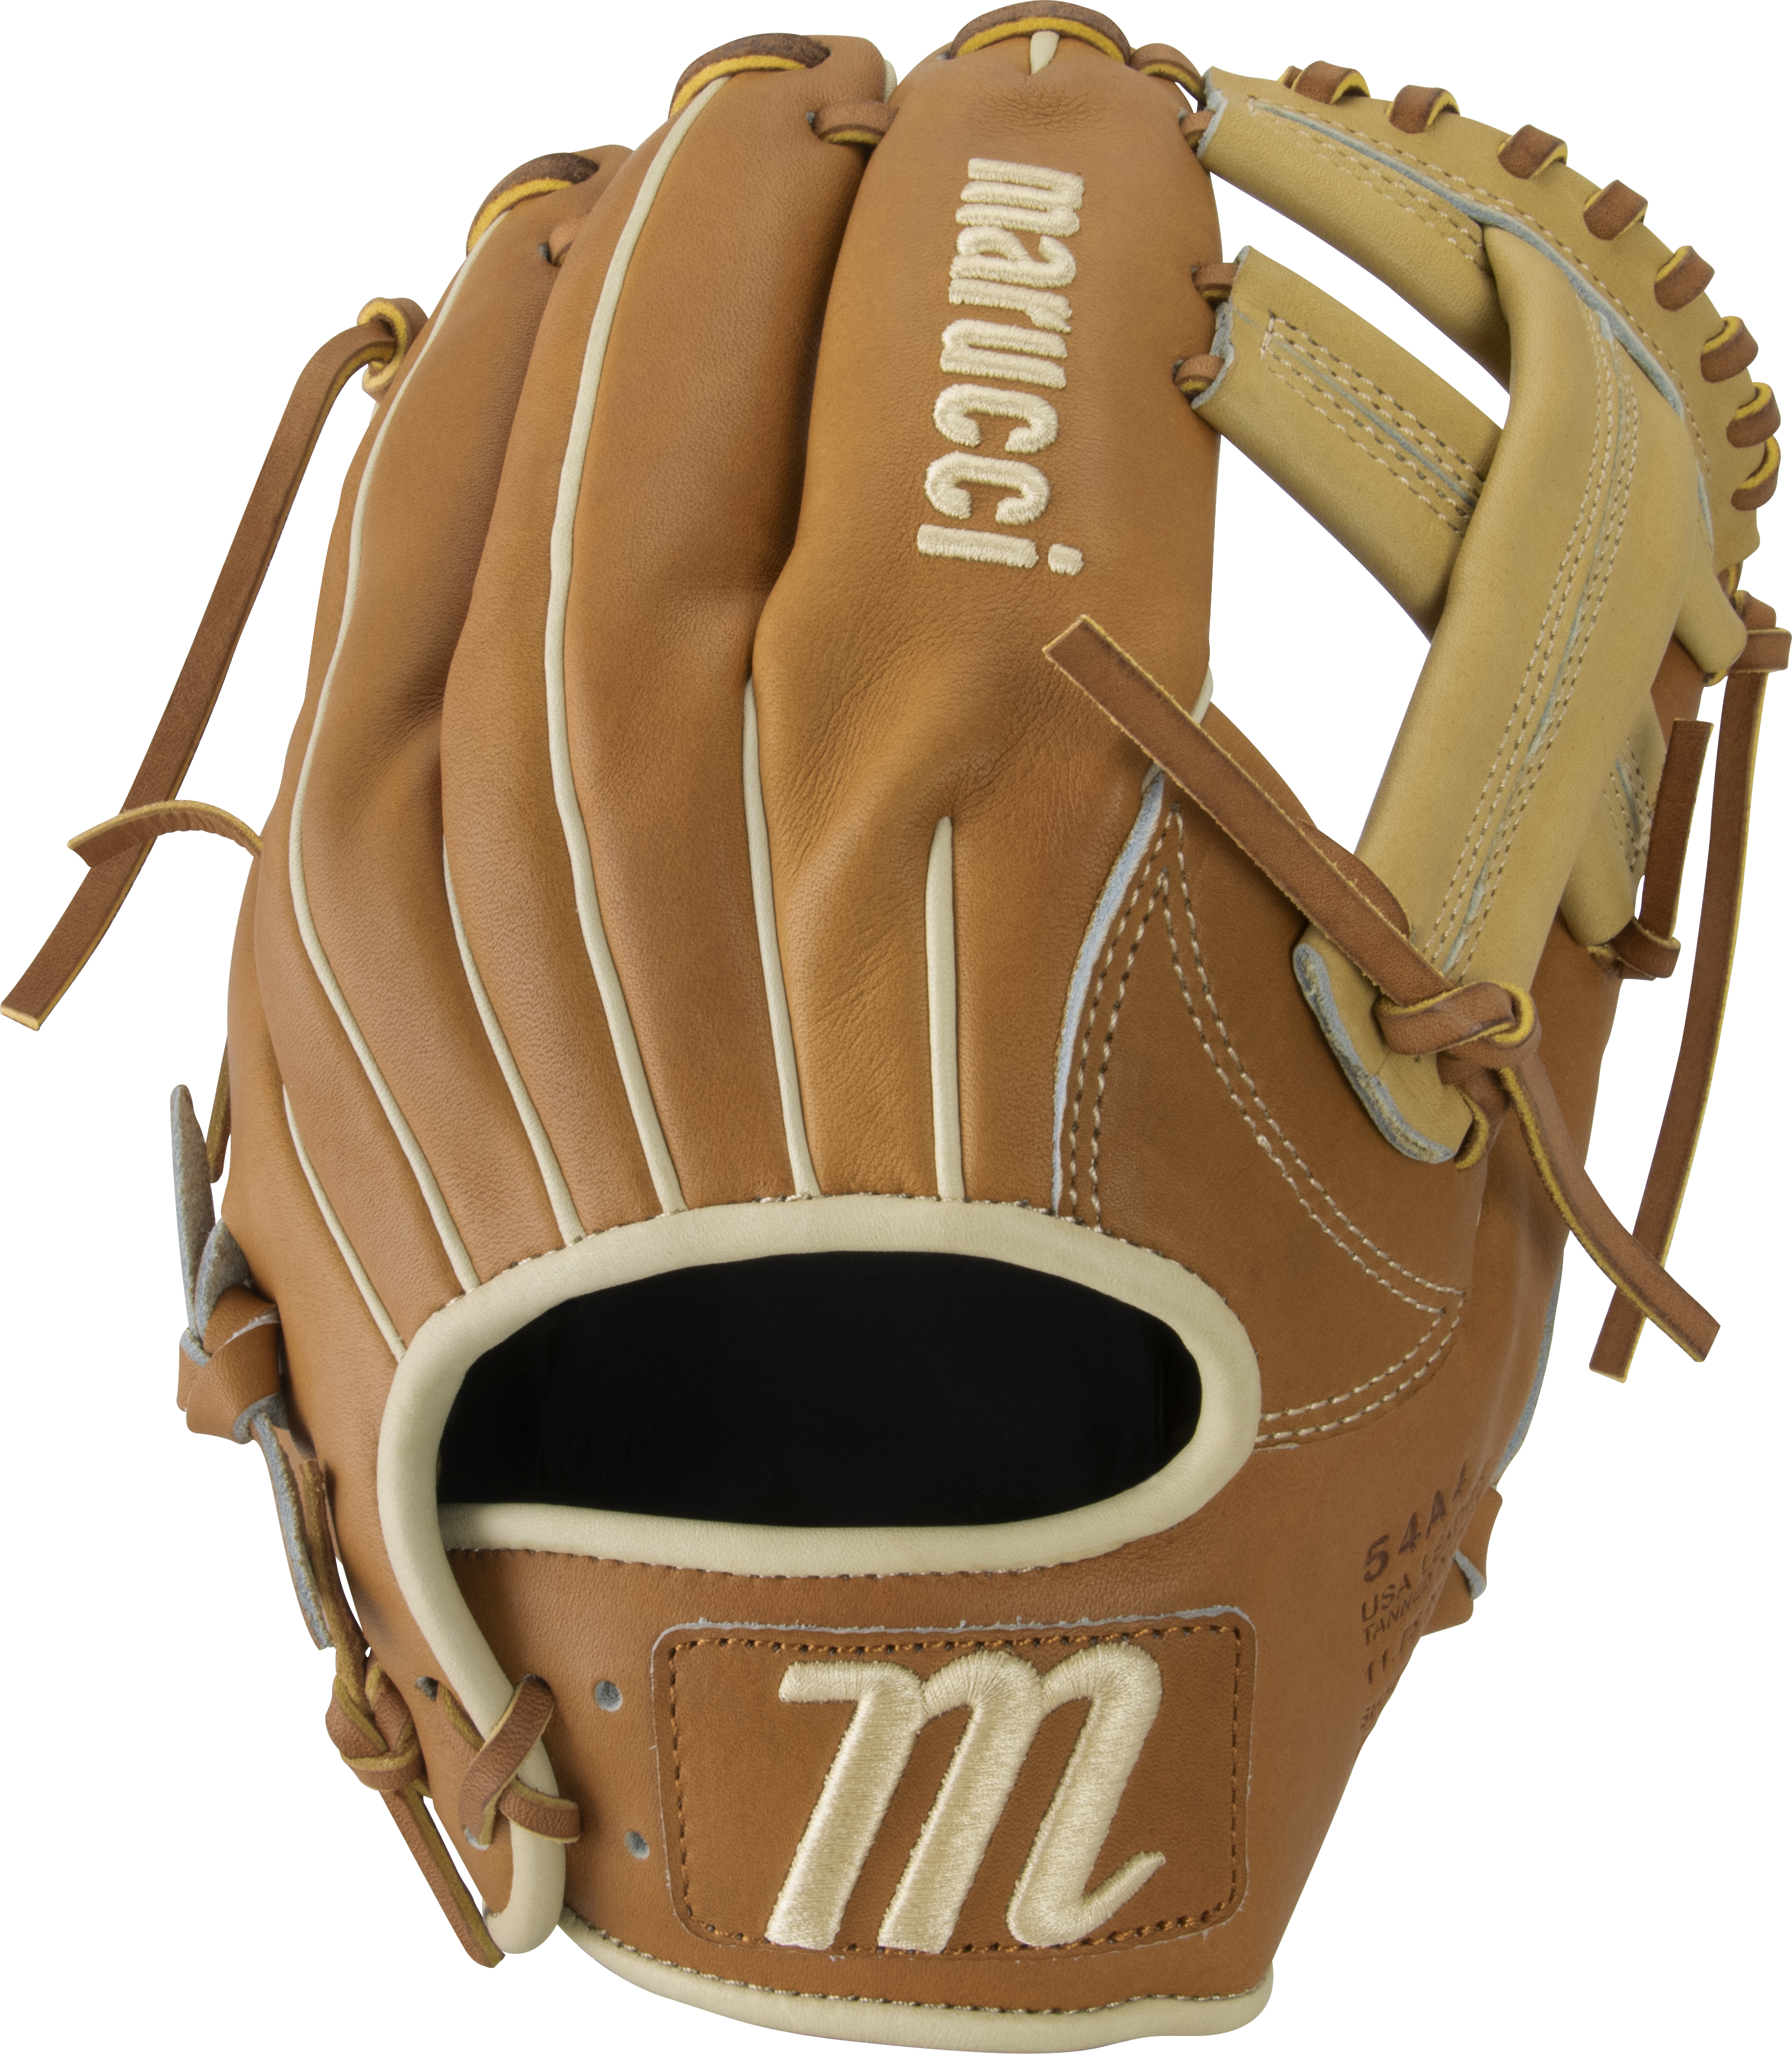 • Premium Japanese-tanned steerhide leather provides stiffness and rugged durability • Extra-smooth cowhide lining with padding-wrapped thumb and pinky loops • Professional-grade USA rawhide laces from Tennessee Tanning Co. • Moisture-wicking mesh wrist lining with added padding.